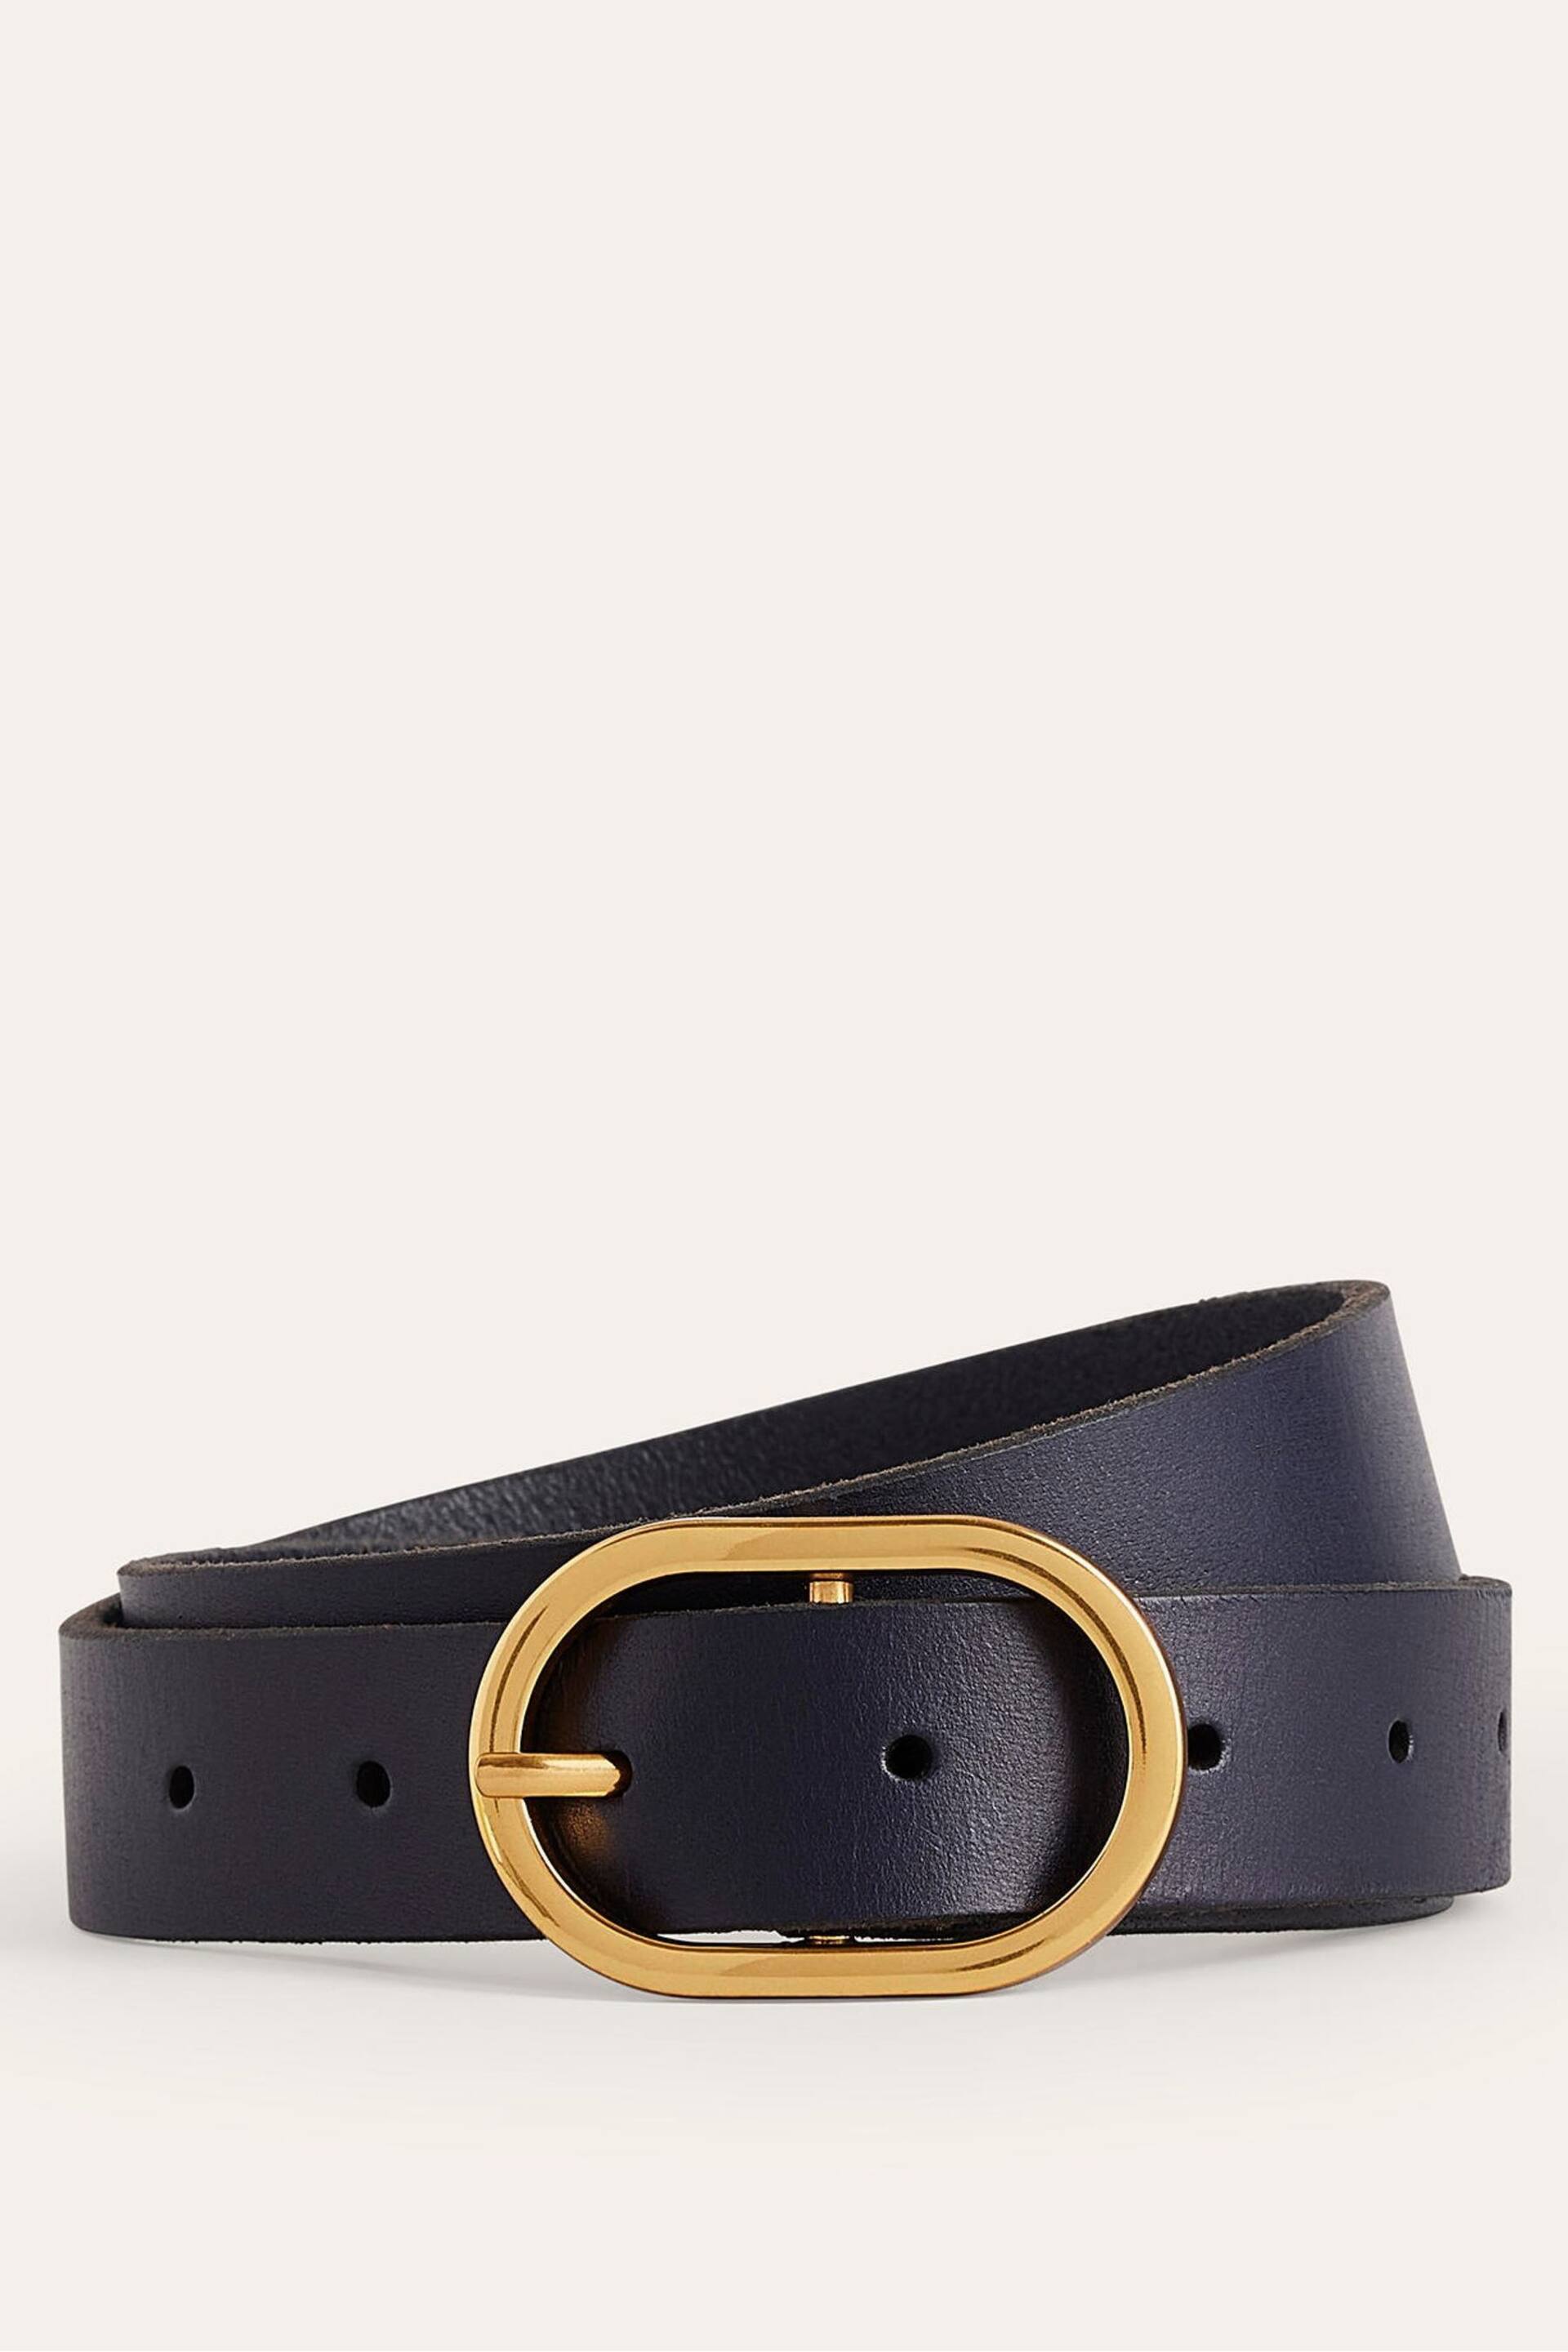 Boden Blue Classic Leather Belt - Image 1 of 3